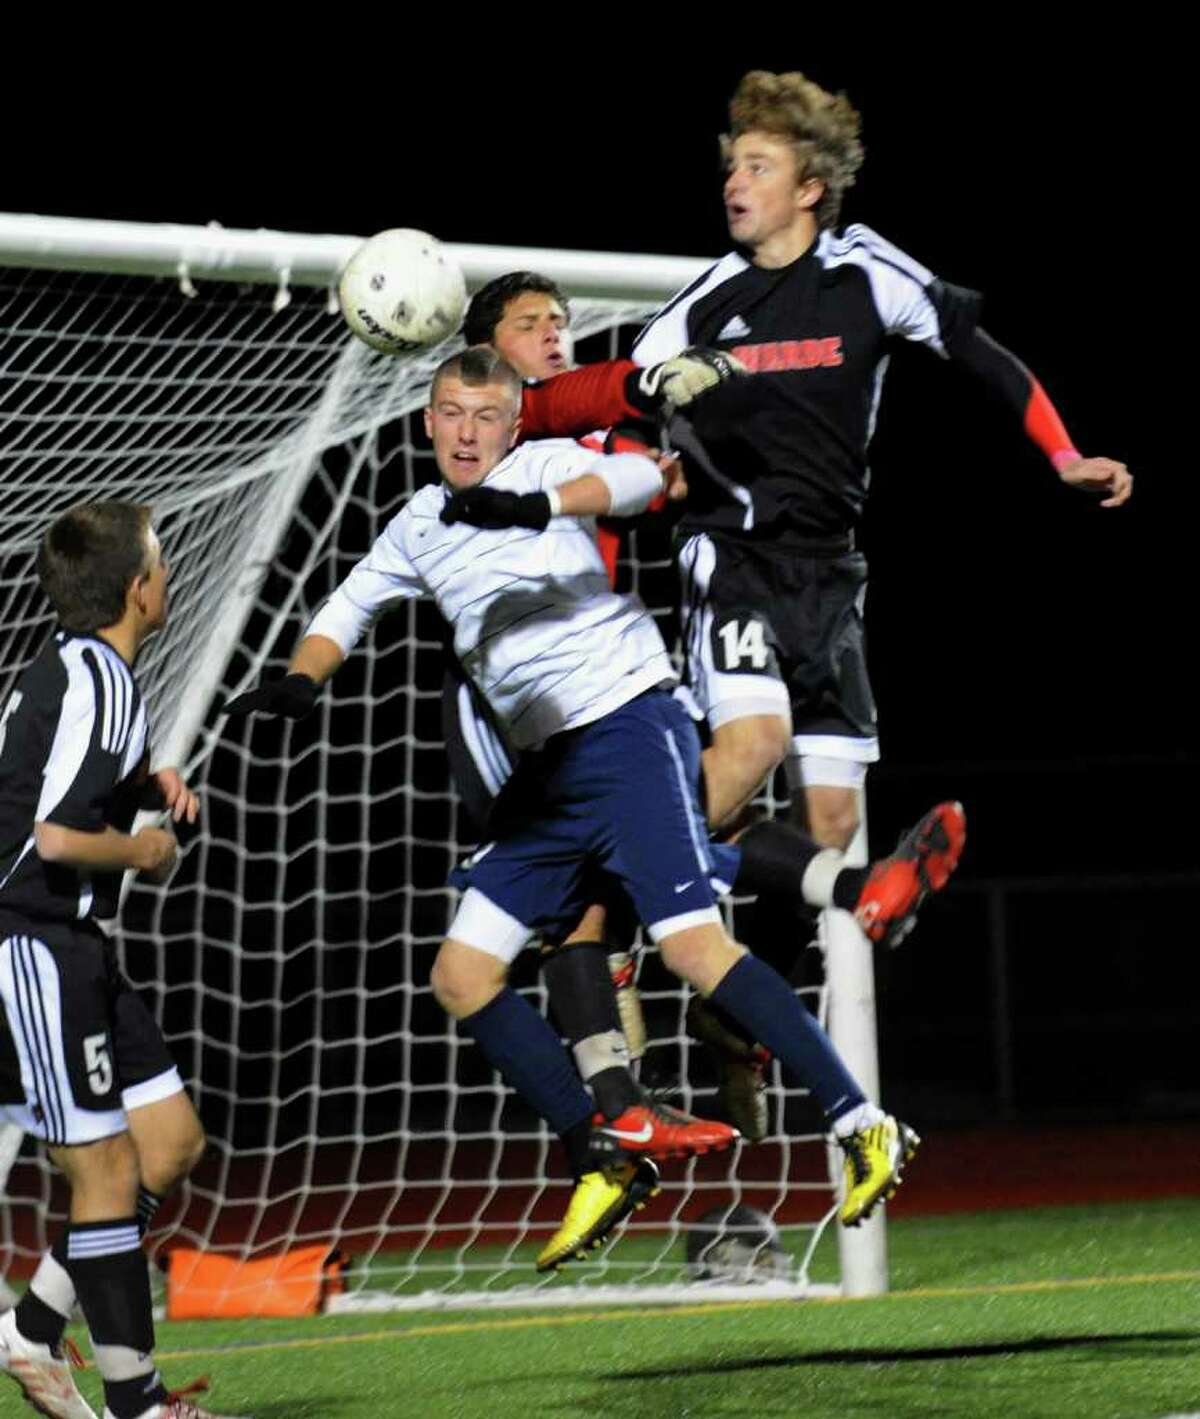 Staples #9 Brendan Lesch tries to head the ball in for a goal but is hampered by Fairfield Warde goalie Dylan Strachen, top center, and #14 Connor Gavey, top right, during FCIAC Championship boys soccer in Norwalk, Conn. on Wednesday November 03, 2010.